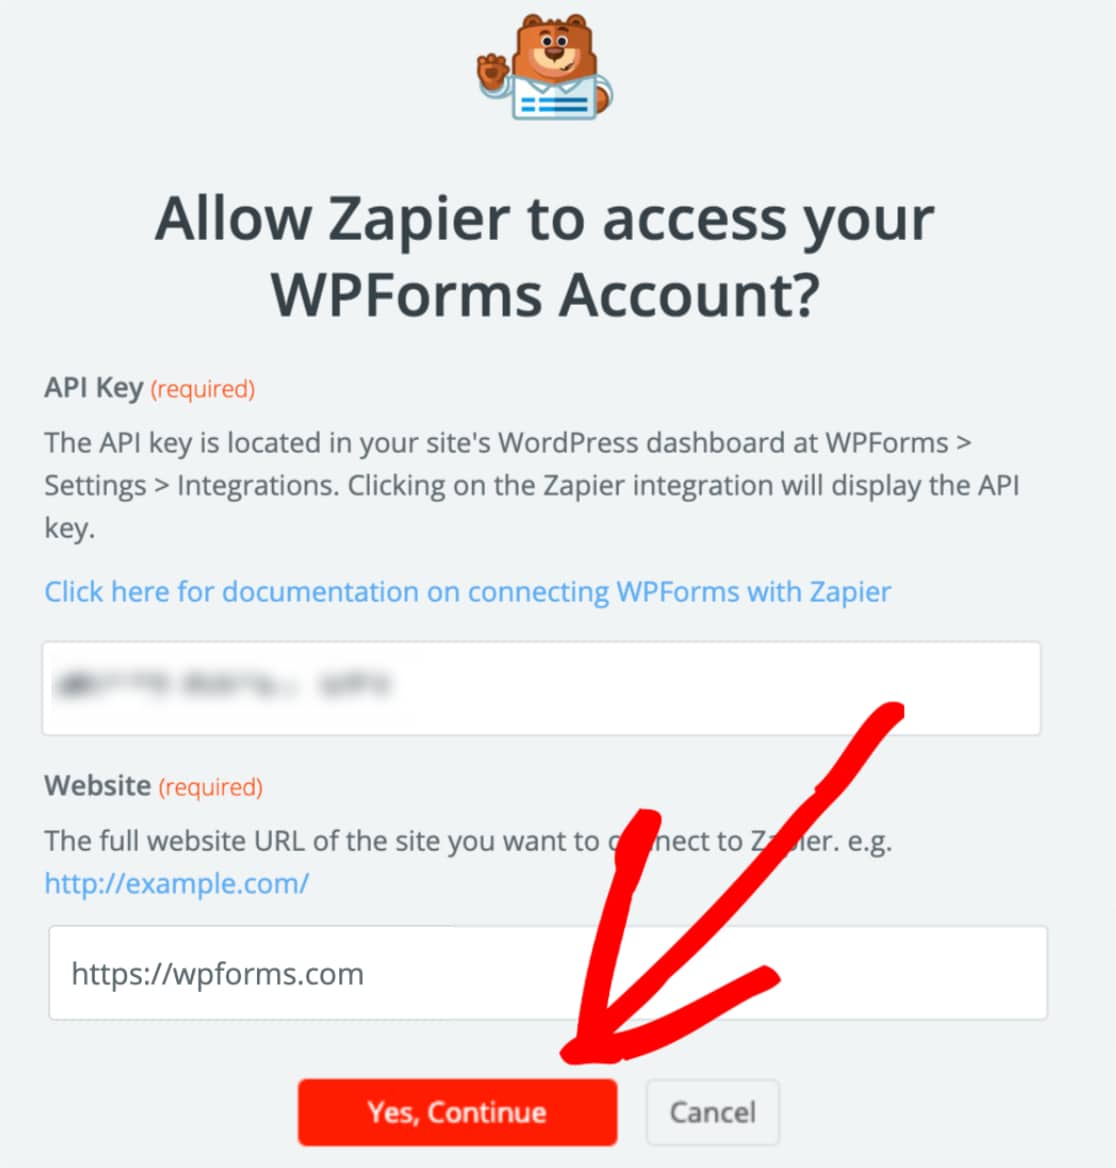 How To Automate Your Work With Zapier And WPForms